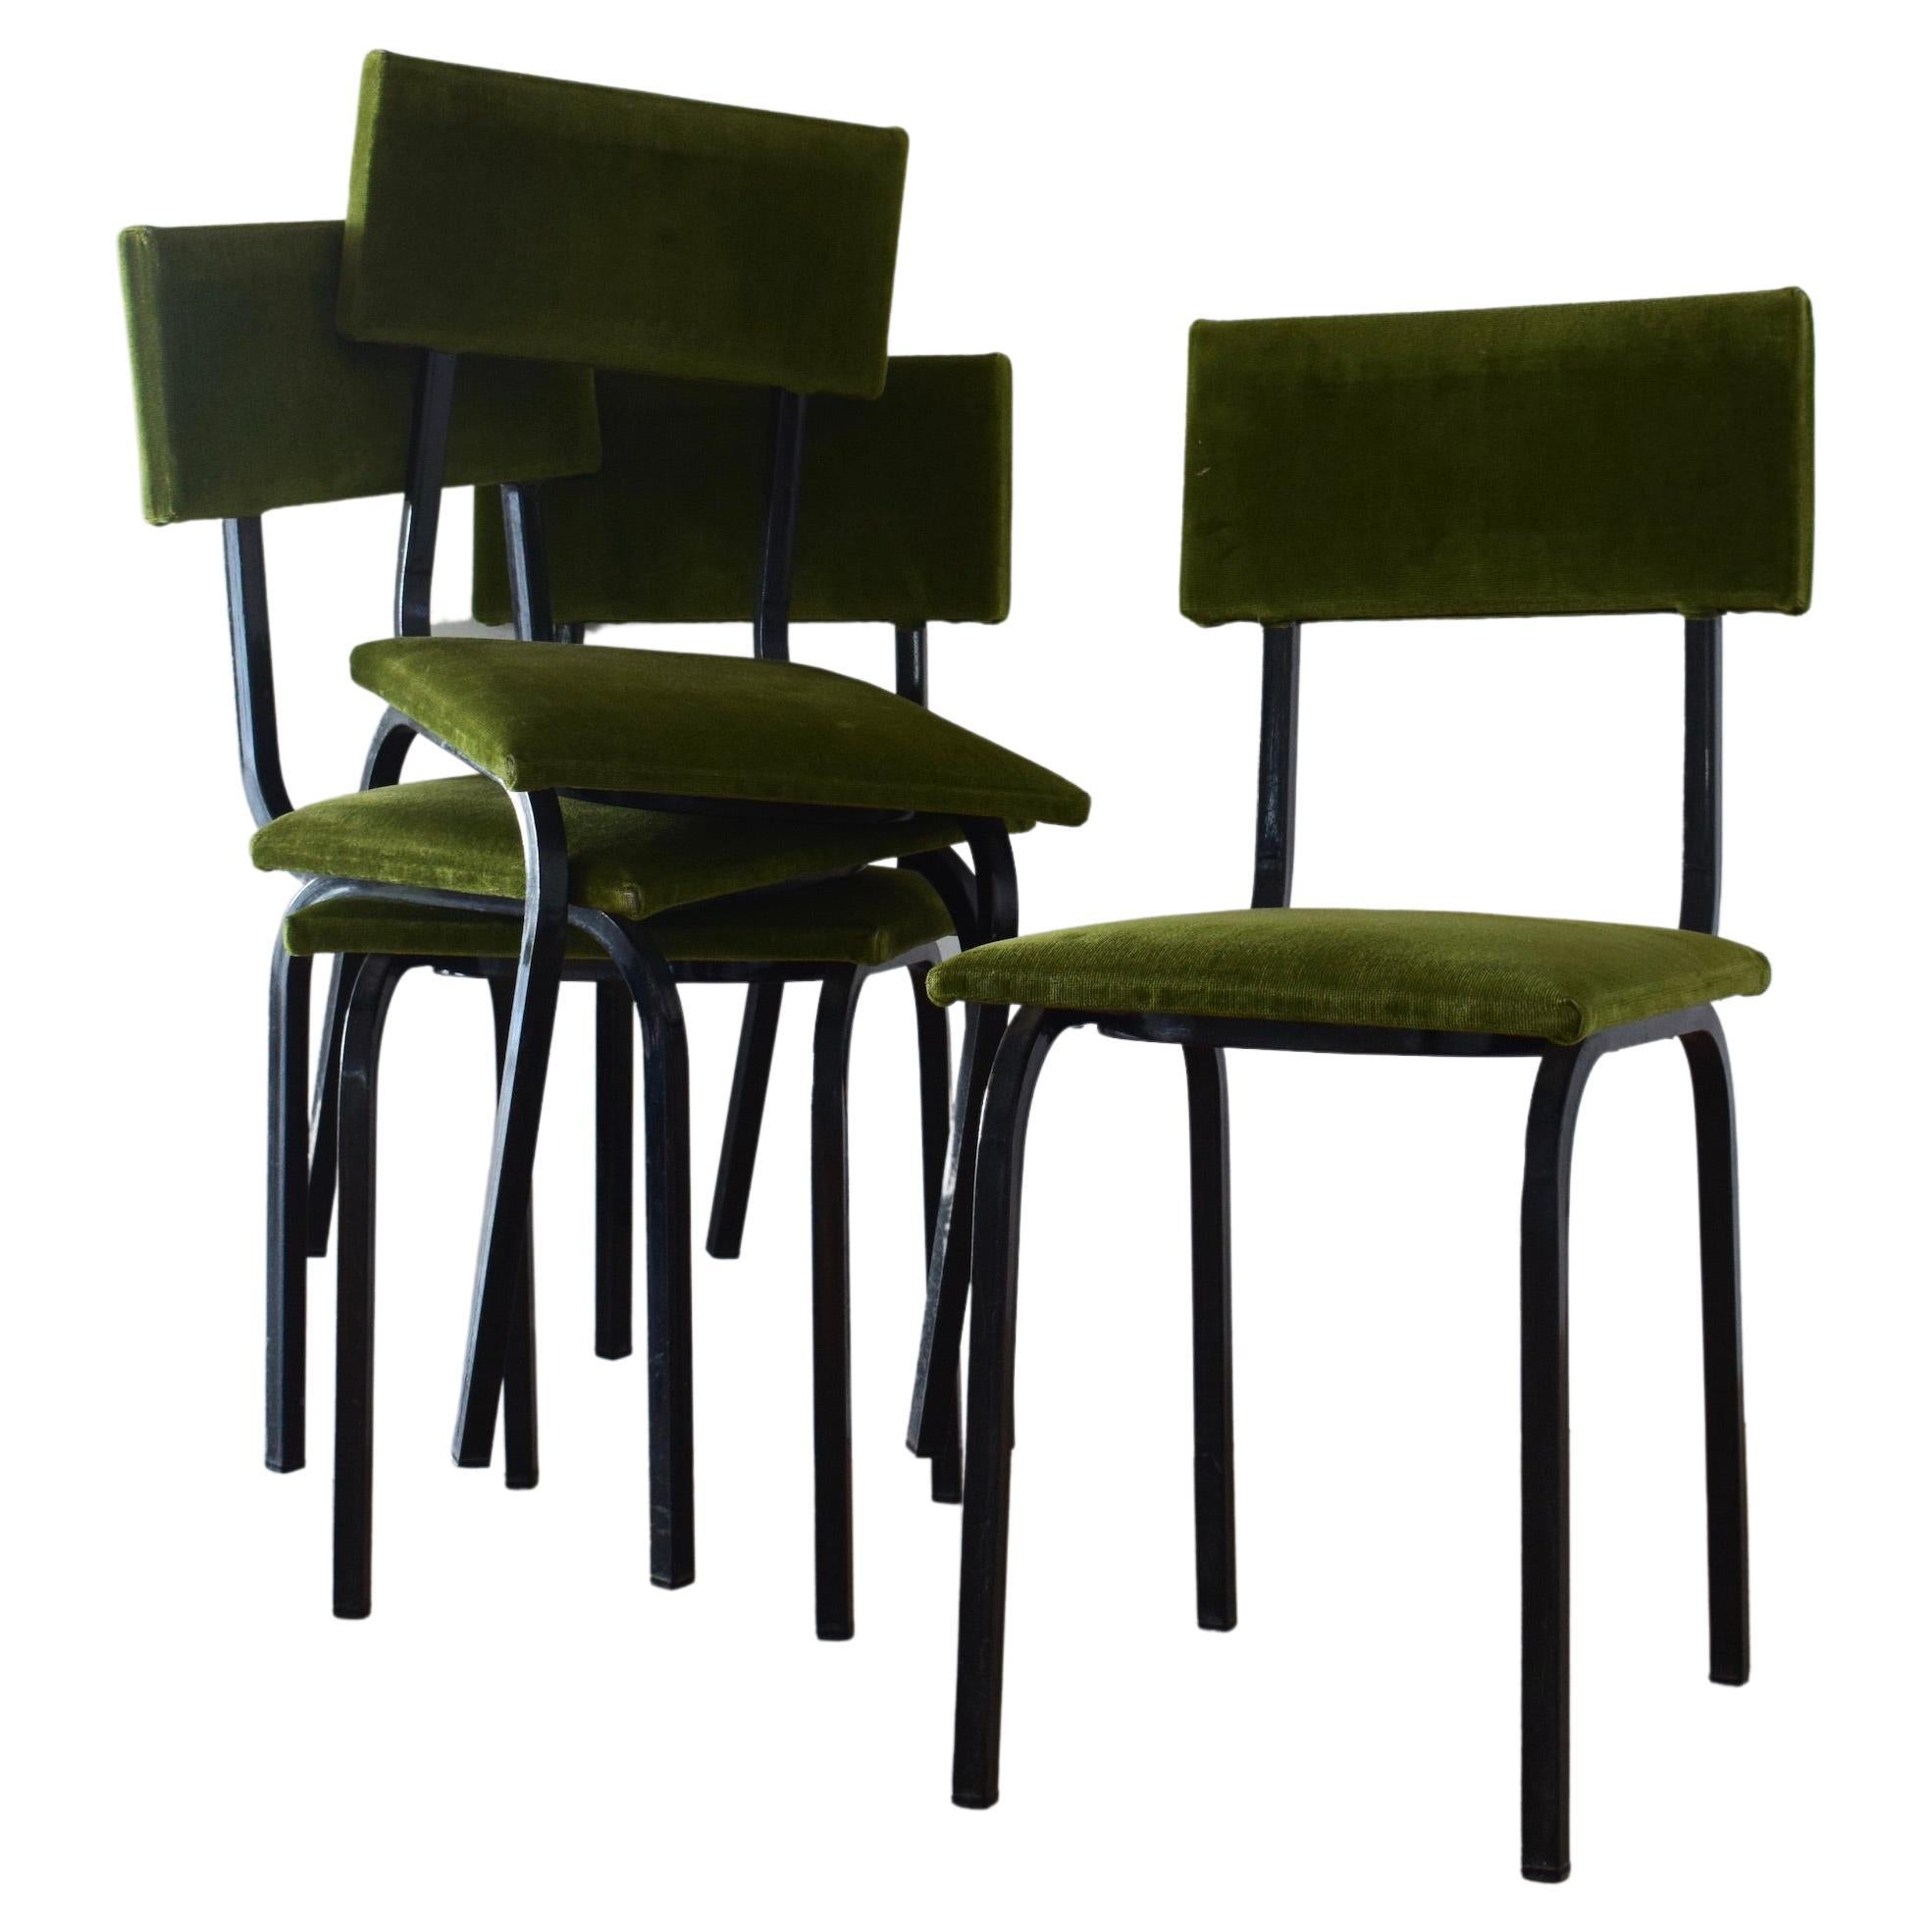 Set of 4 1960s Dining Chairs in Green Velvet with Black Metal Frames